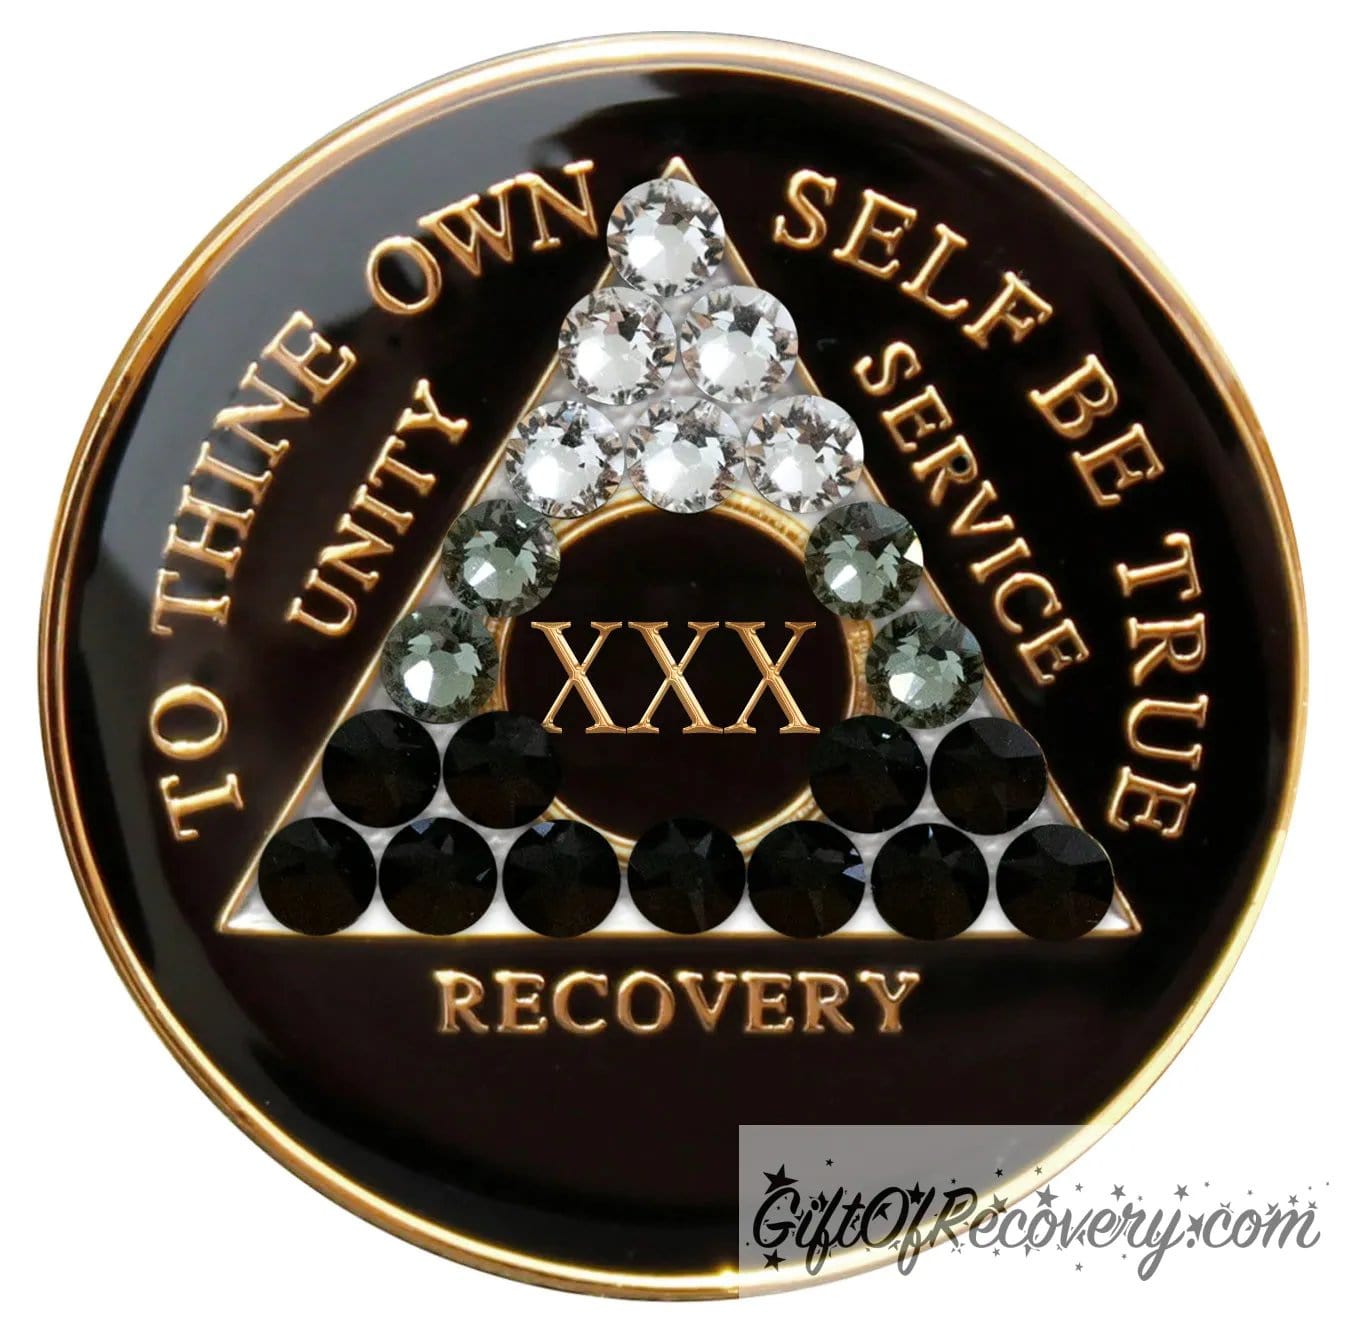 30 year AA recovery medallion black onyx with 21 genuine crystals ranging from clear to grey, to black, representing the transformation of the recovery journey, the AA moto along with unity, service, recovery, roman numeral, and the outer rim of medallion are embossed with 14k gold plated bras, the medallion is sealed in resin for a glossy finish.